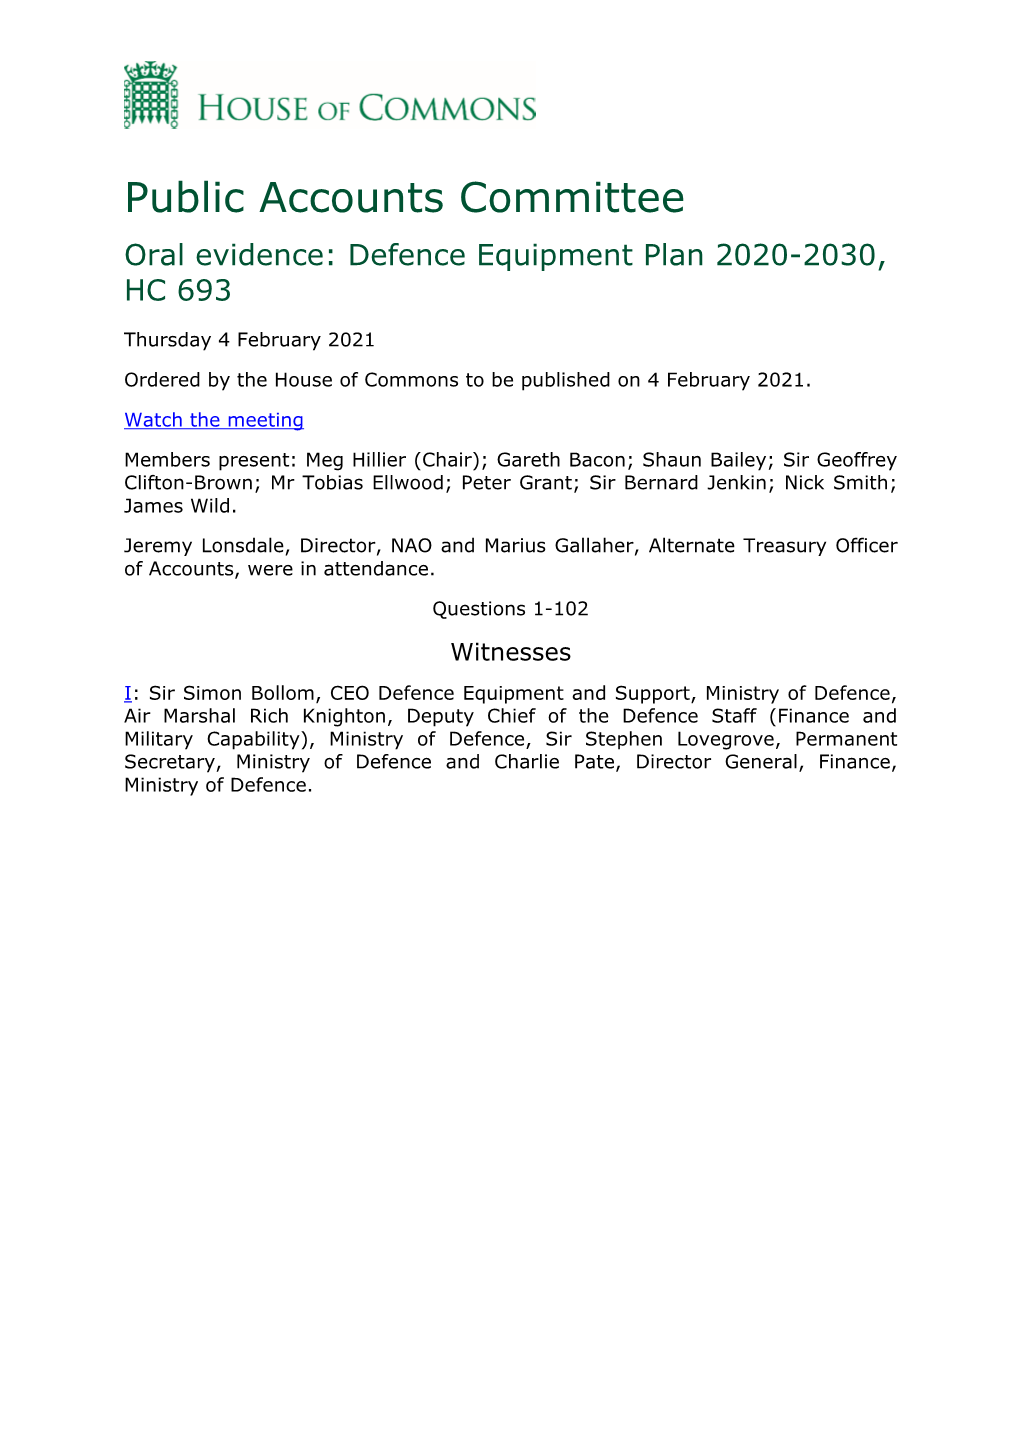 Public Accounts Committee Oral Evidence: Defence Equipment Plan 2020-2030, HC 693